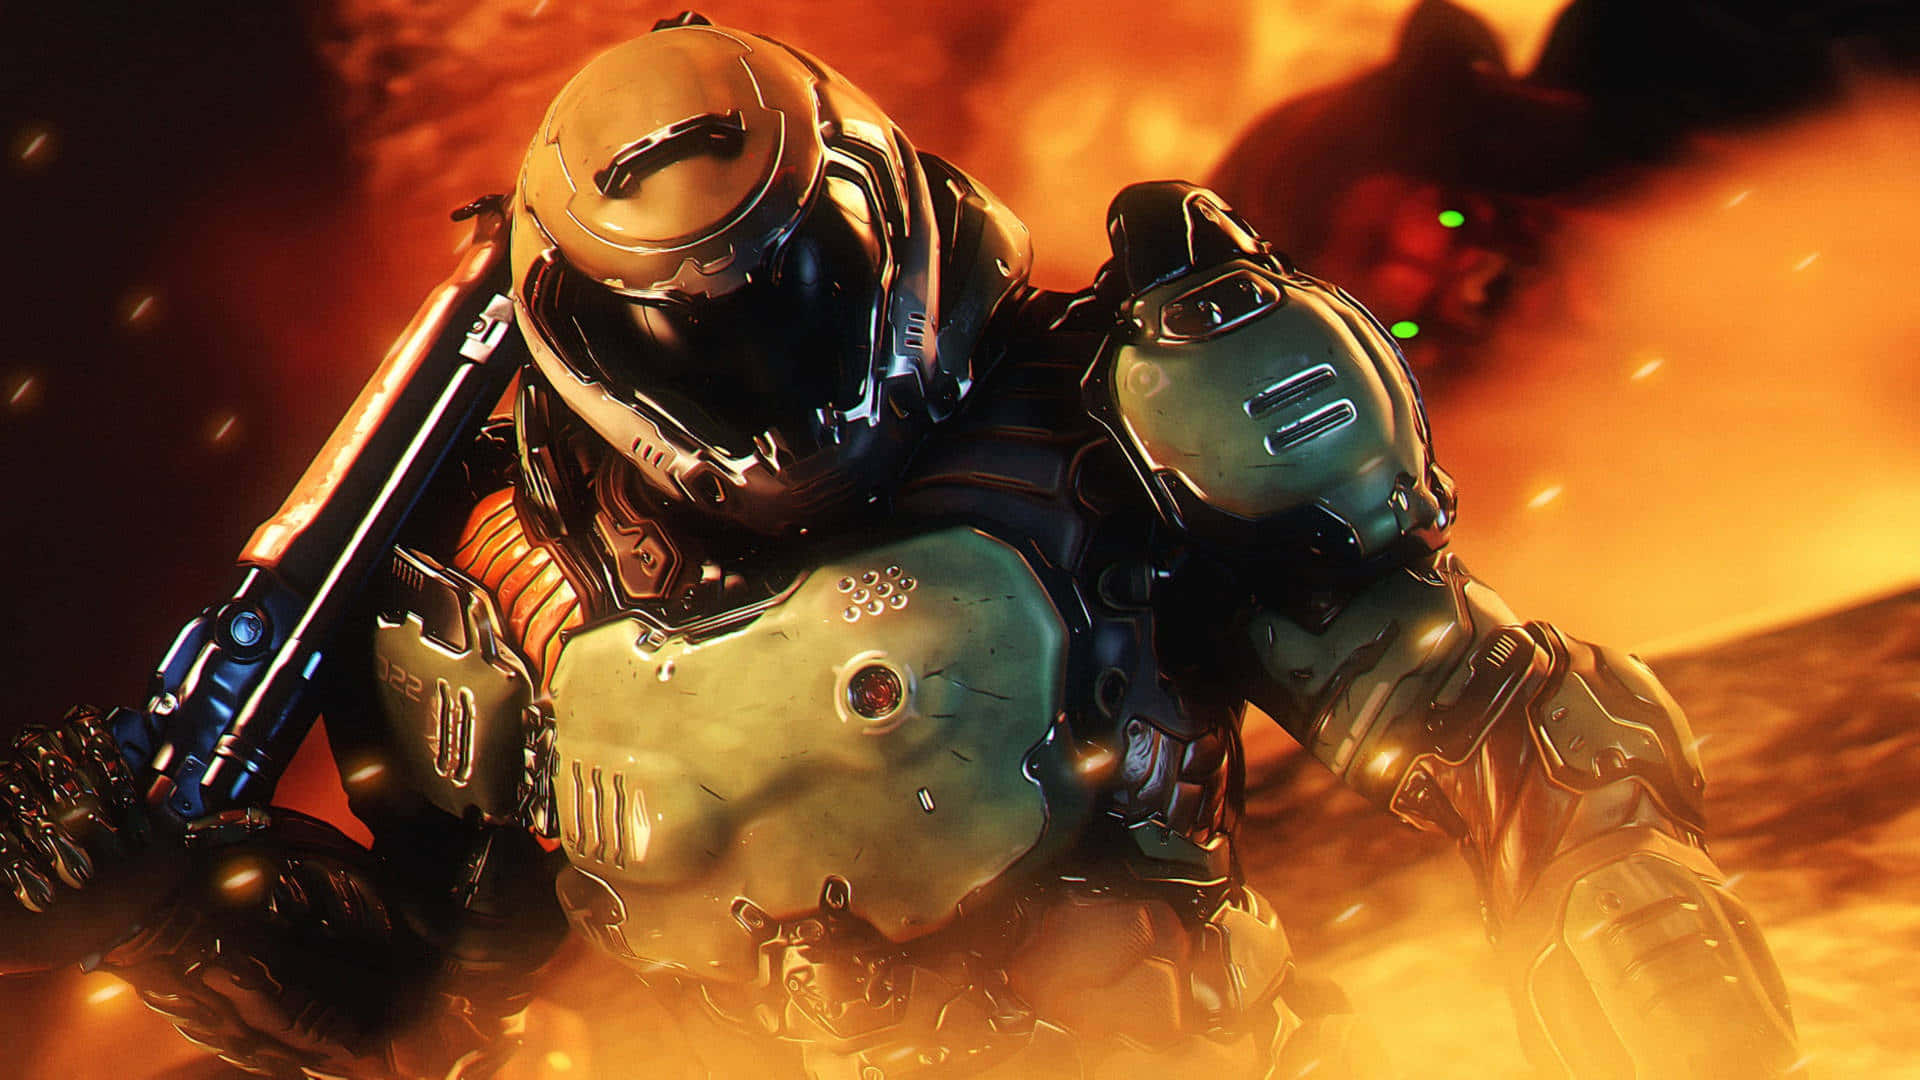 Slay demons and take down Hell's armies with DOOM ETERNAL Wallpaper